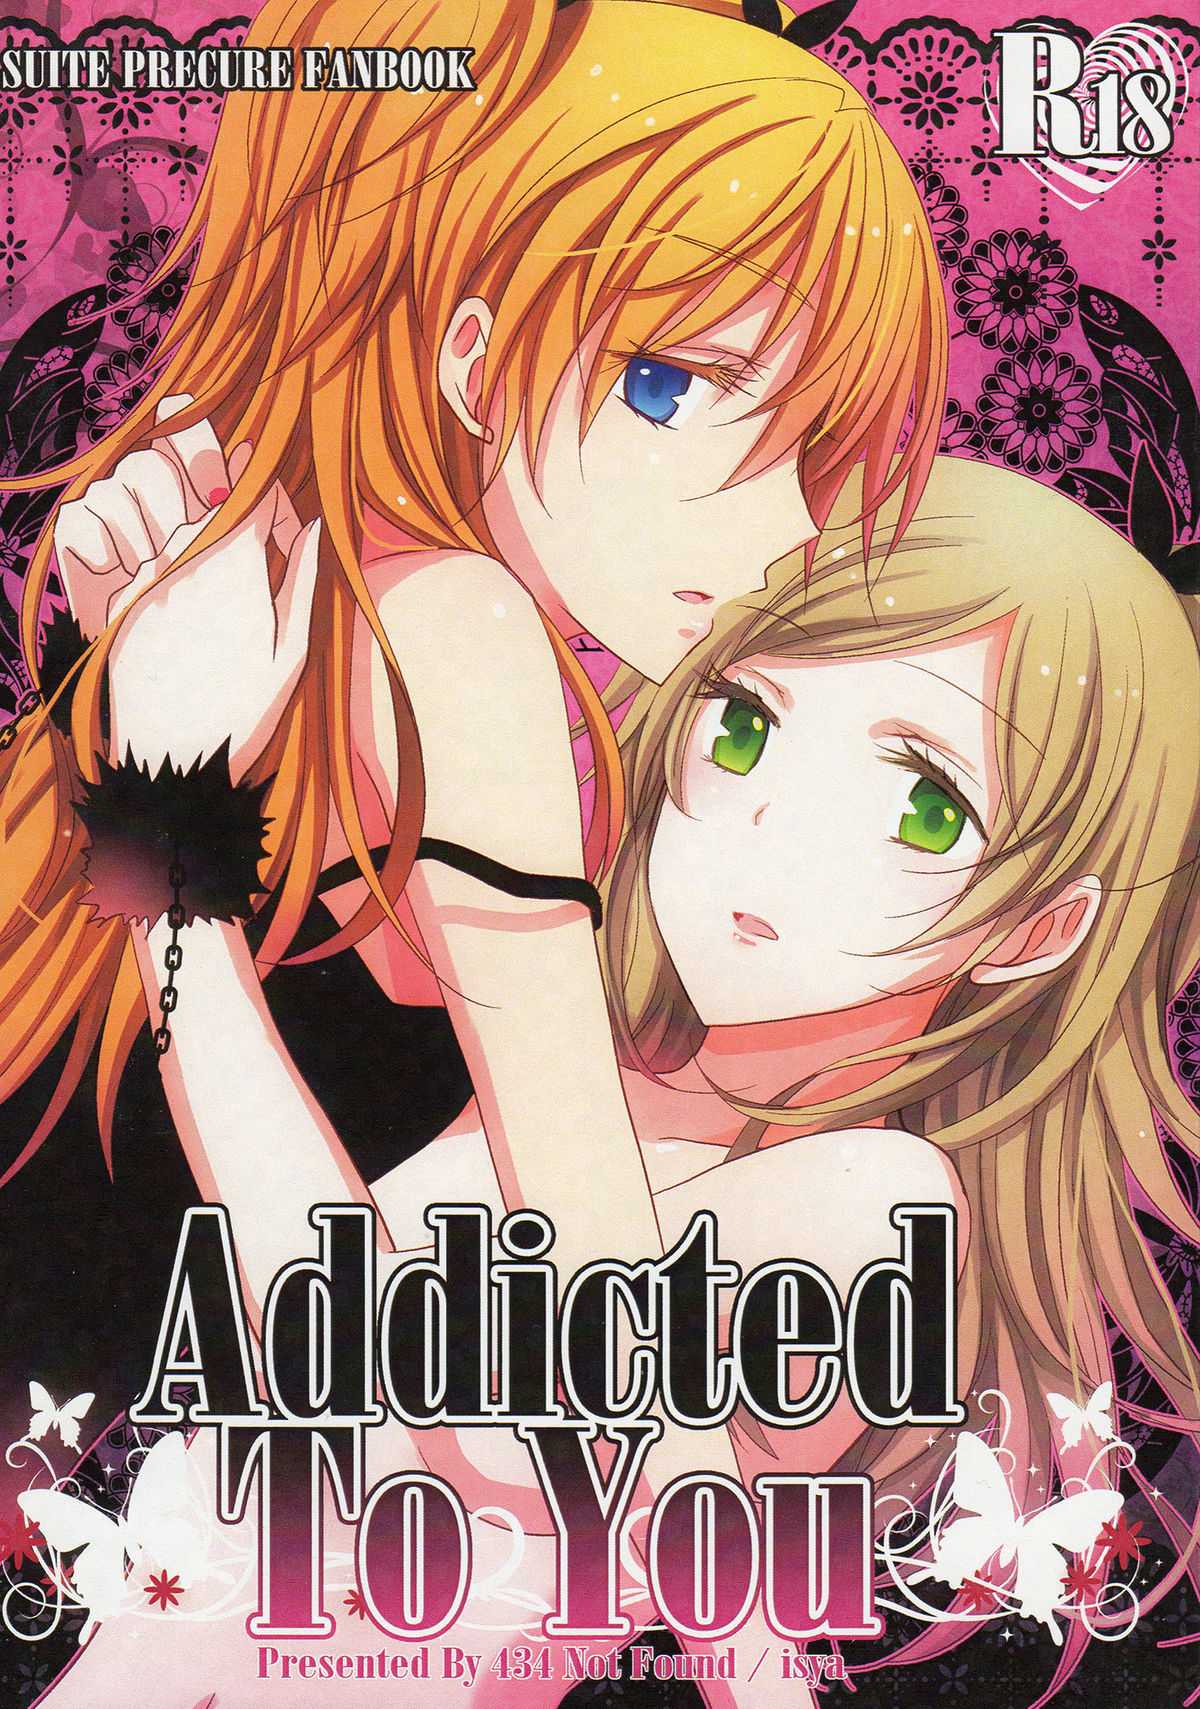 (C81) [434NotFound (isya)] Addicted To You (Suite PreCure) [English] [Yuri-ism] (C81) [434NotFound (isya)] Addicted To You (スイートプリキュア♪) [英訳]